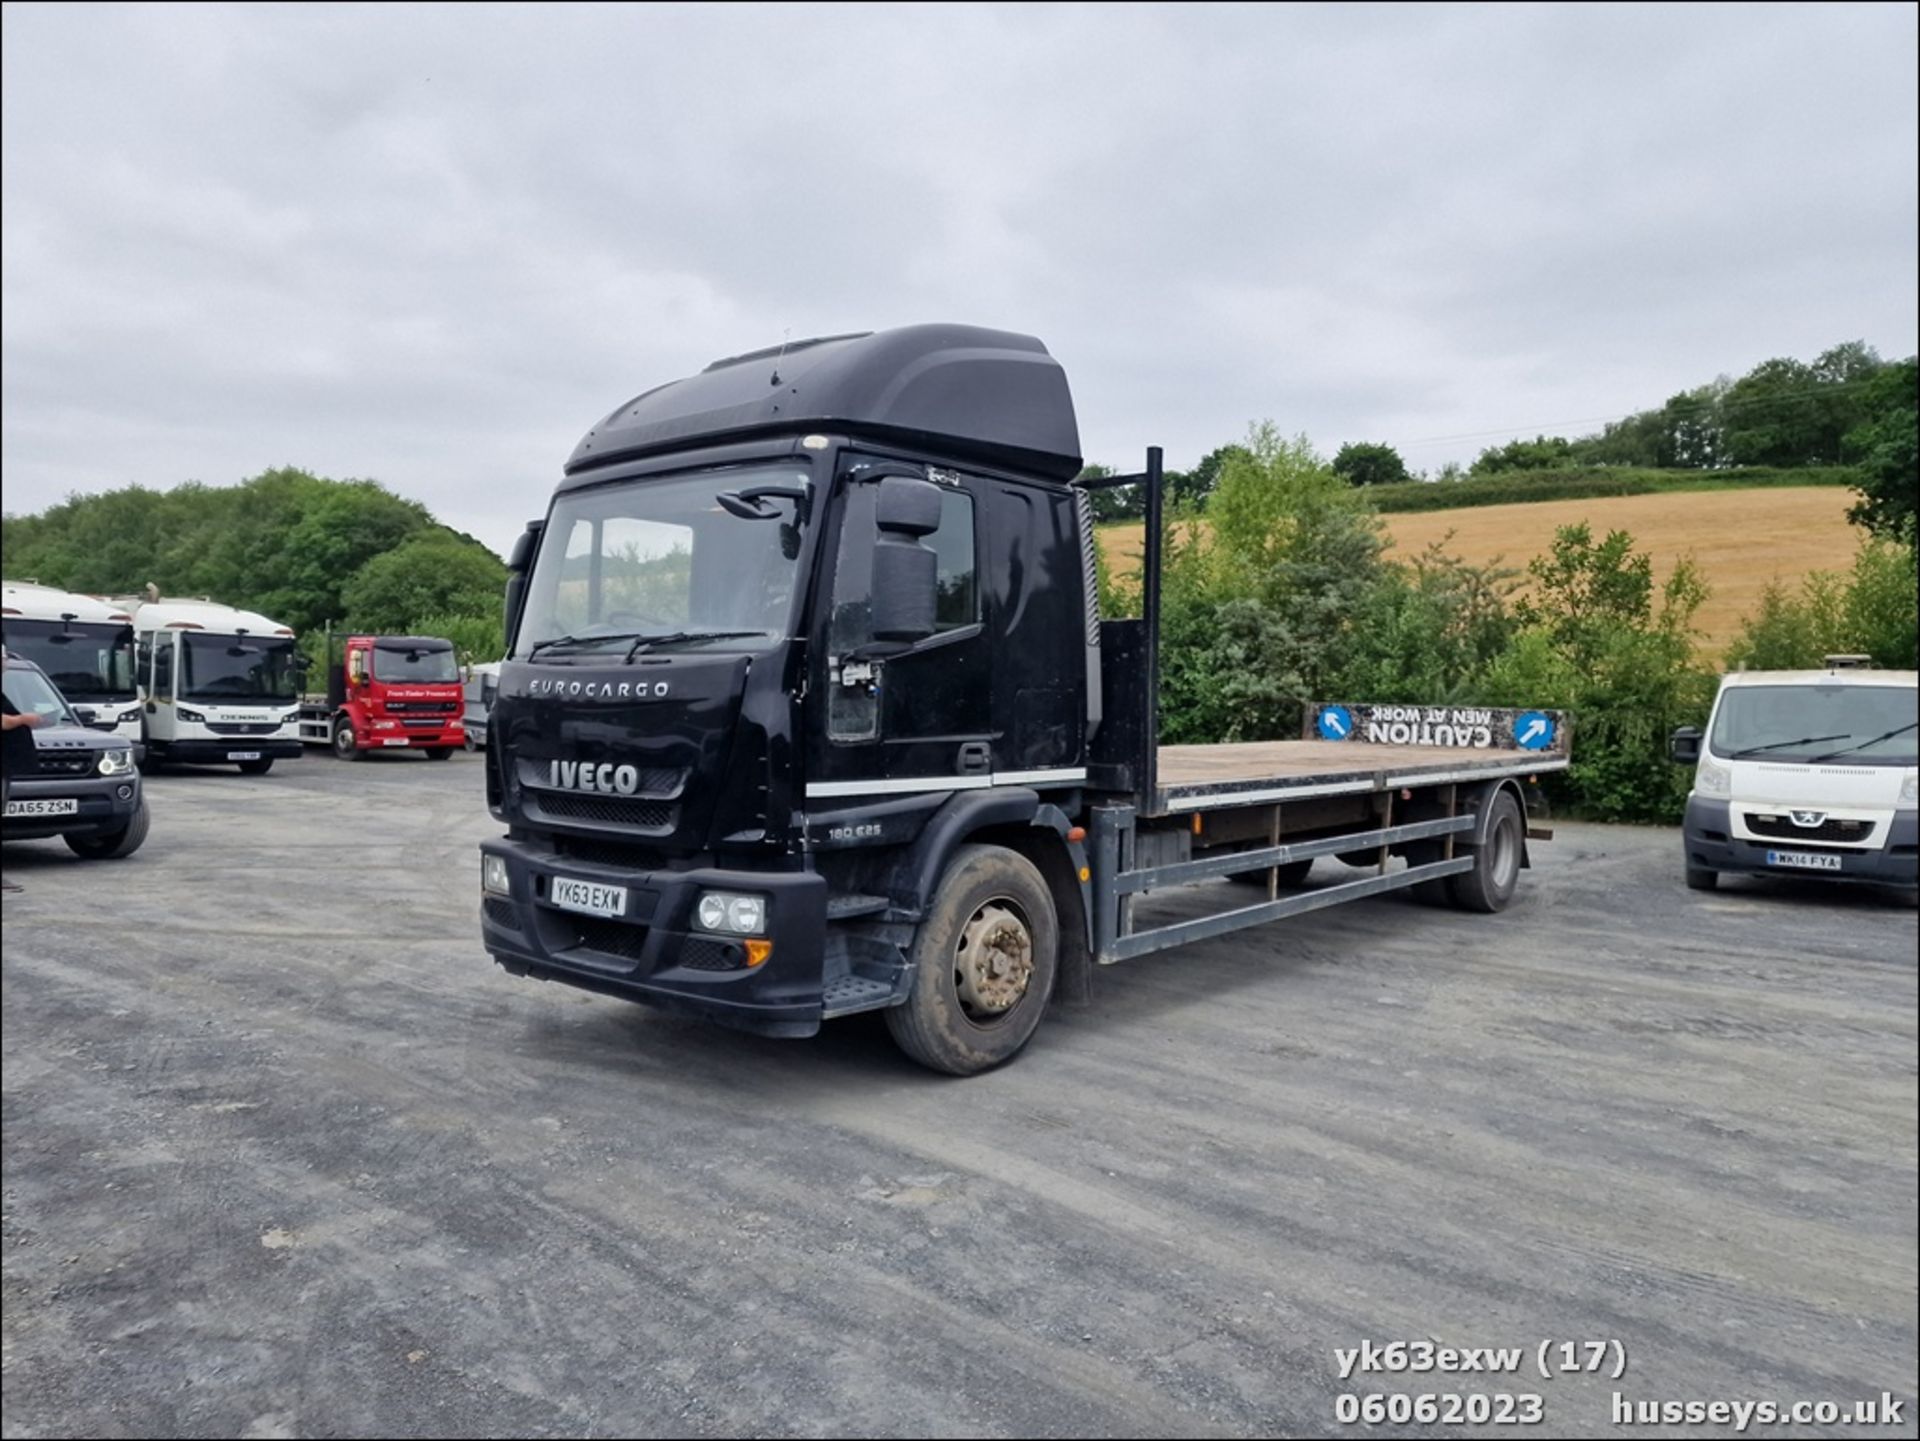 13/63 IVECO EUROCARGO (MY 2008) - 5880cc 2dr Flat Bed (Black) - Image 17 of 21